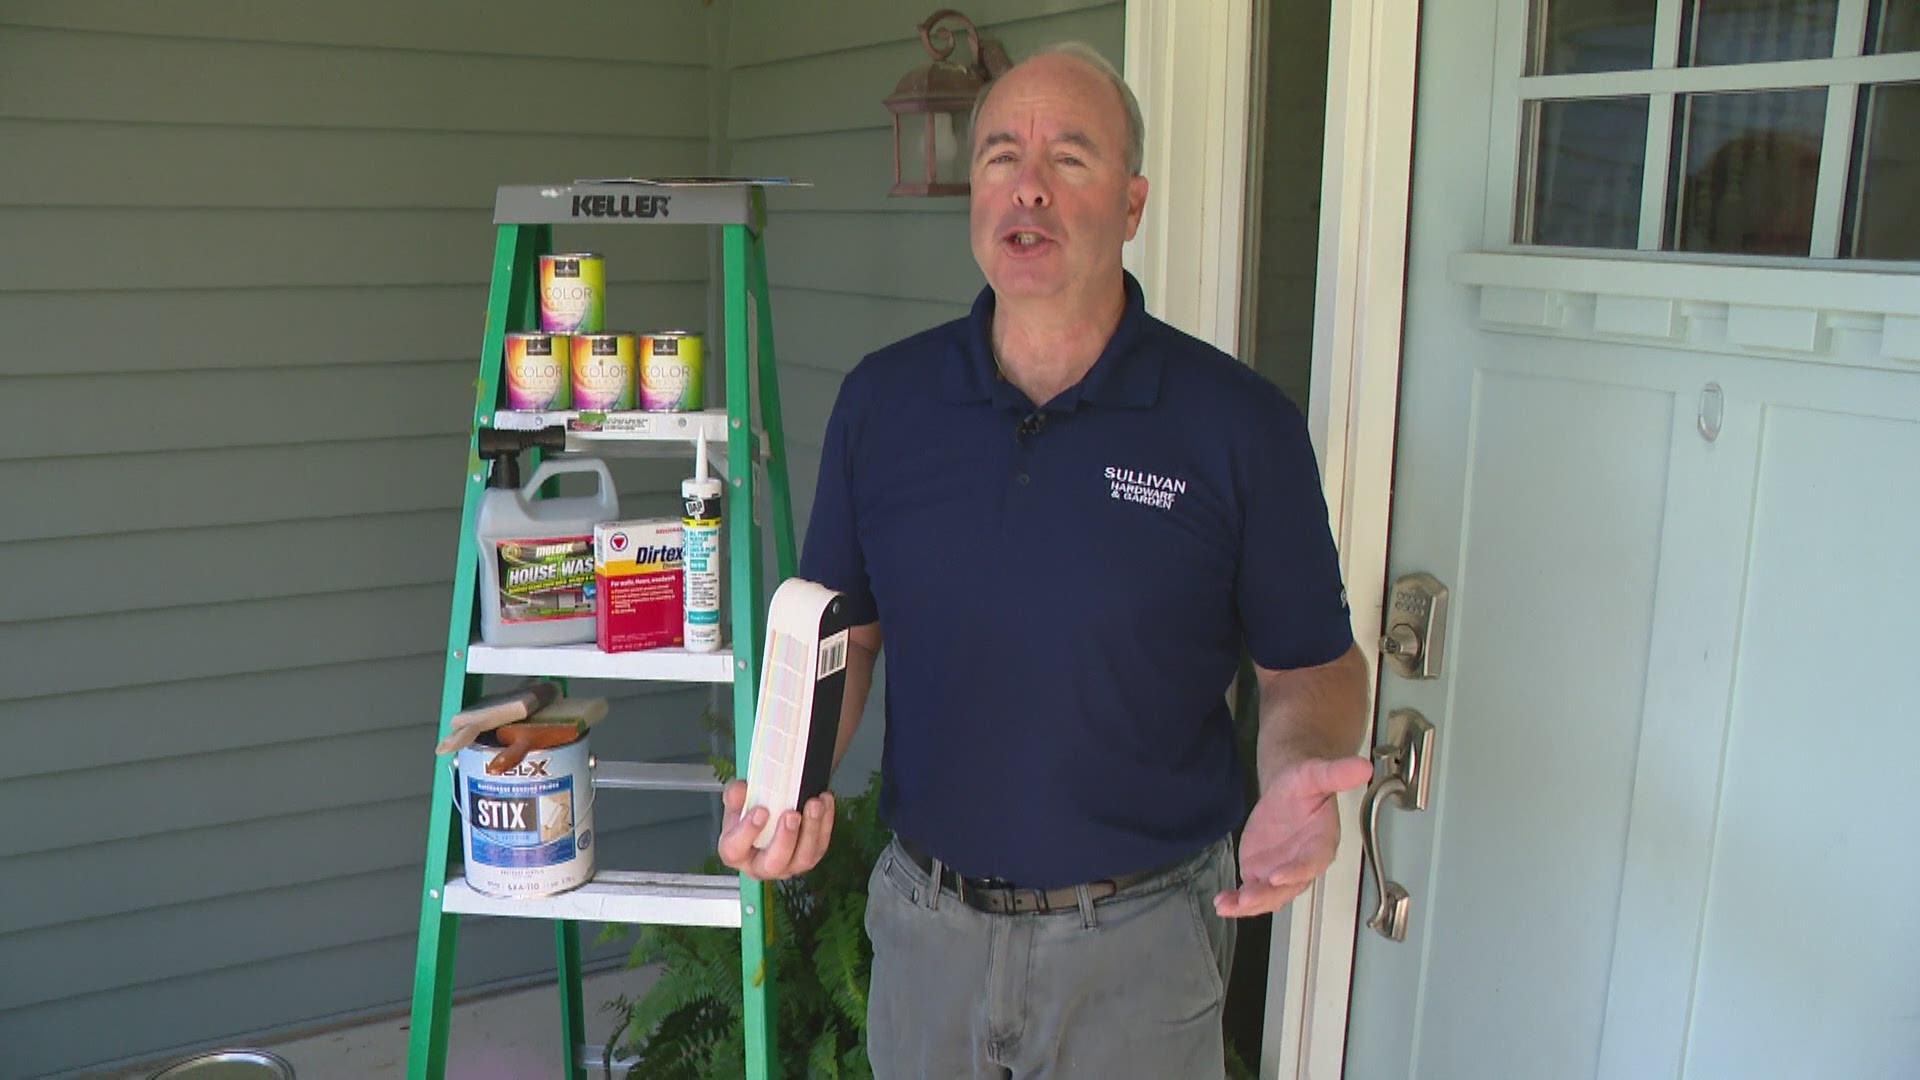 Pat Sullivan from Sullivan Hardware and Garden, gives us great advice for do-it-yourself home improvements.